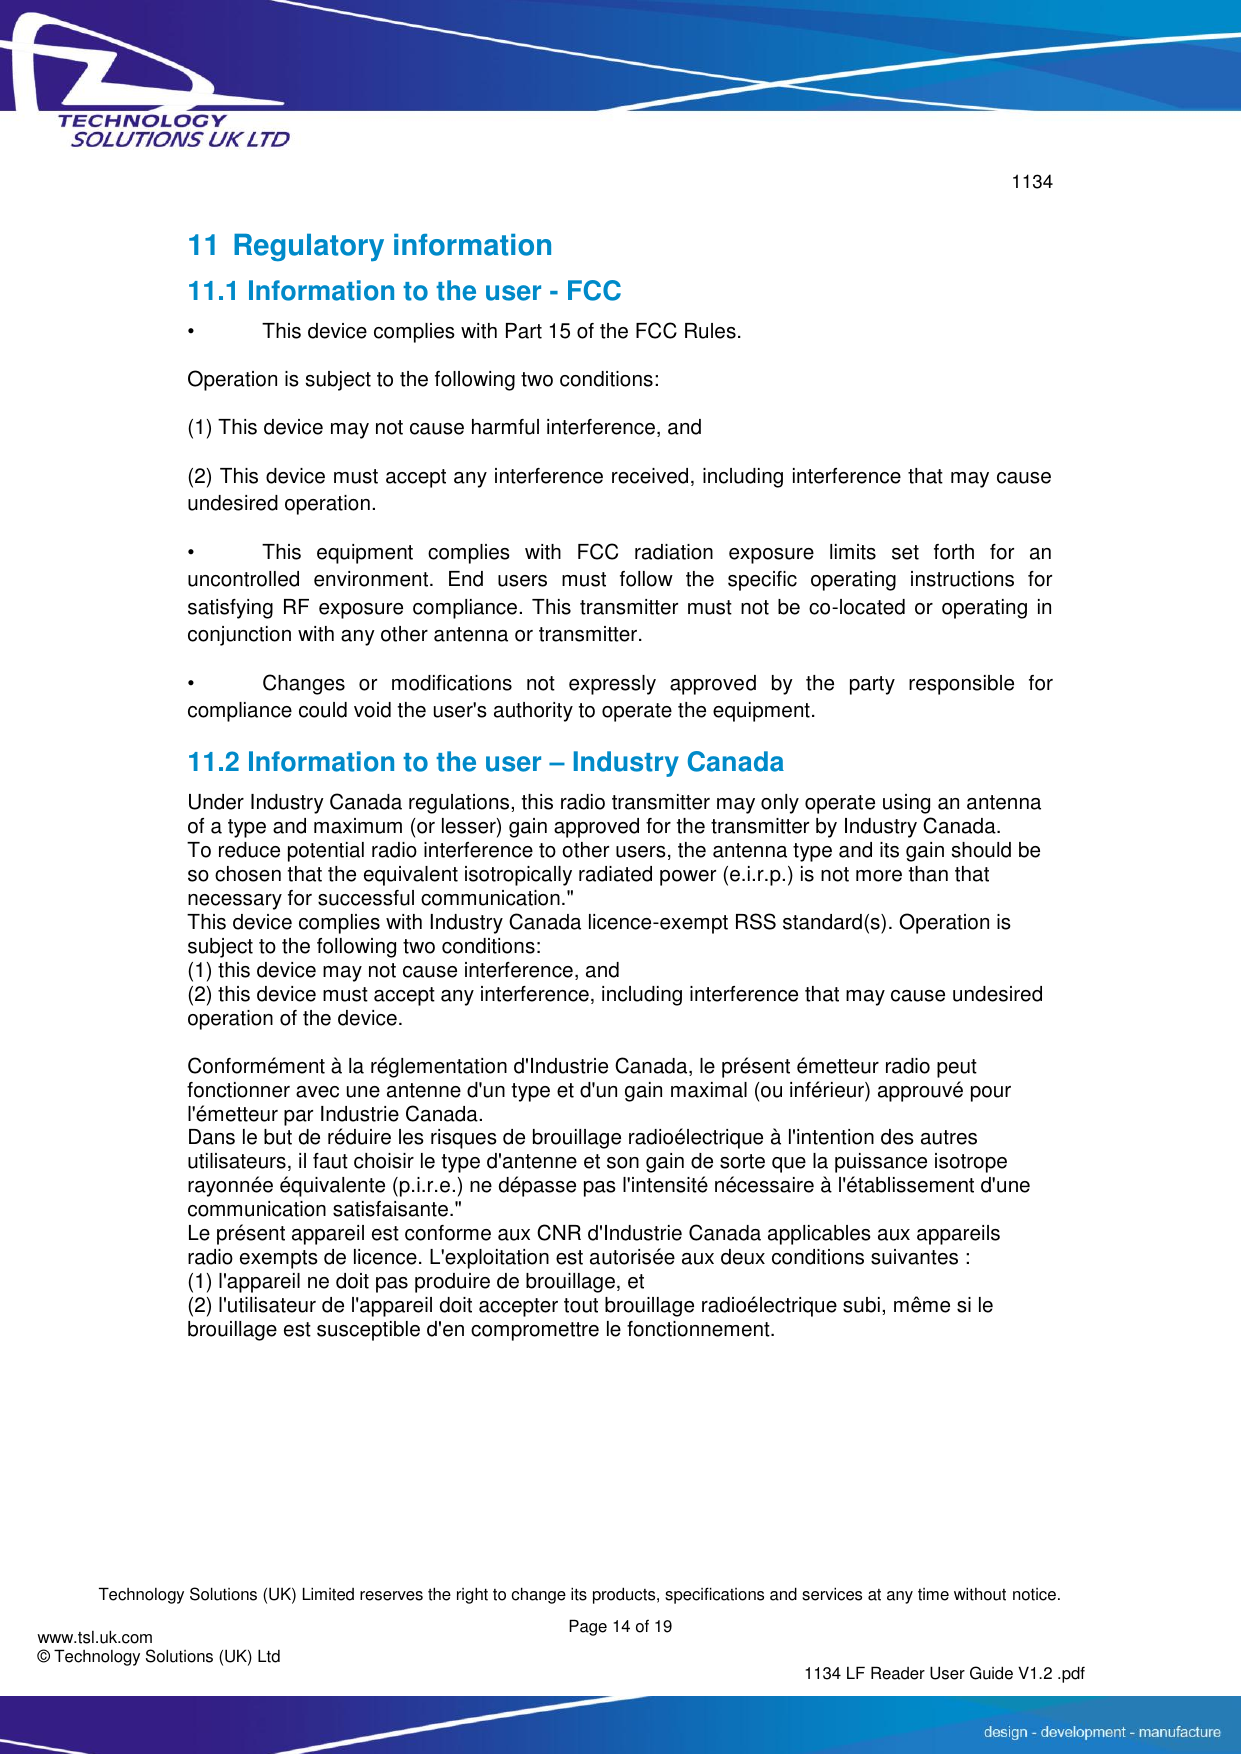        1134  Technology Solutions (UK) Limited reserves the right to change its products, specifications and services at any time without notice.   Page 14 of 19 1134 LF Reader User Guide V1.2 .pdf www.tsl.uk.com © Technology Solutions (UK) Ltd  11 Regulatory information 11.1 Information to the user - FCC •  This device complies with Part 15 of the FCC Rules.  Operation is subject to the following two conditions:  (1) This device may not cause harmful interference, and  (2) This device must accept any interference received, including interference that may cause undesired operation.  •  This  equipment  complies  with  FCC  radiation  exposure  limits  set  forth  for  an uncontrolled  environment.  End  users  must  follow  the  specific  operating  instructions  for satisfying RF exposure compliance. This transmitter must not be co-located or operating in conjunction with any other antenna or transmitter.  •  Changes  or  modifications  not  expressly  approved  by  the  party  responsible  for compliance could void the user&apos;s authority to operate the equipment. 11.2 Information to the user – Industry Canada Under Industry Canada regulations, this radio transmitter may only operate using an antenna of a type and maximum (or lesser) gain approved for the transmitter by Industry Canada. To reduce potential radio interference to other users, the antenna type and its gain should be so chosen that the equivalent isotropically radiated power (e.i.r.p.) is not more than that necessary for successful communication.&quot; This device complies with Industry Canada licence-exempt RSS standard(s). Operation is subject to the following two conditions: (1) this device may not cause interference, and  (2) this device must accept any interference, including interference that may cause undesired operation of the device.  Conformément à la réglementation d&apos;Industrie Canada, le présent émetteur radio peut fonctionner avec une antenne d&apos;un type et d&apos;un gain maximal (ou inférieur) approuvé pour l&apos;émetteur par Industrie Canada.  Dans le but de réduire les risques de brouillage radioélectrique à l&apos;intention des autres utilisateurs, il faut choisir le type d&apos;antenne et son gain de sorte que la puissance isotrope rayonnée équivalente (p.i.r.e.) ne dépasse pas l&apos;intensité nécessaire à l&apos;établissement d&apos;une communication satisfaisante.&quot; Le présent appareil est conforme aux CNR d&apos;Industrie Canada applicables aux appareils radio exempts de licence. L&apos;exploitation est autorisée aux deux conditions suivantes : (1) l&apos;appareil ne doit pas produire de brouillage, et (2) l&apos;utilisateur de l&apos;appareil doit accepter tout brouillage radioélectrique subi, même si le brouillage est susceptible d&apos;en compromettre le fonctionnement.    